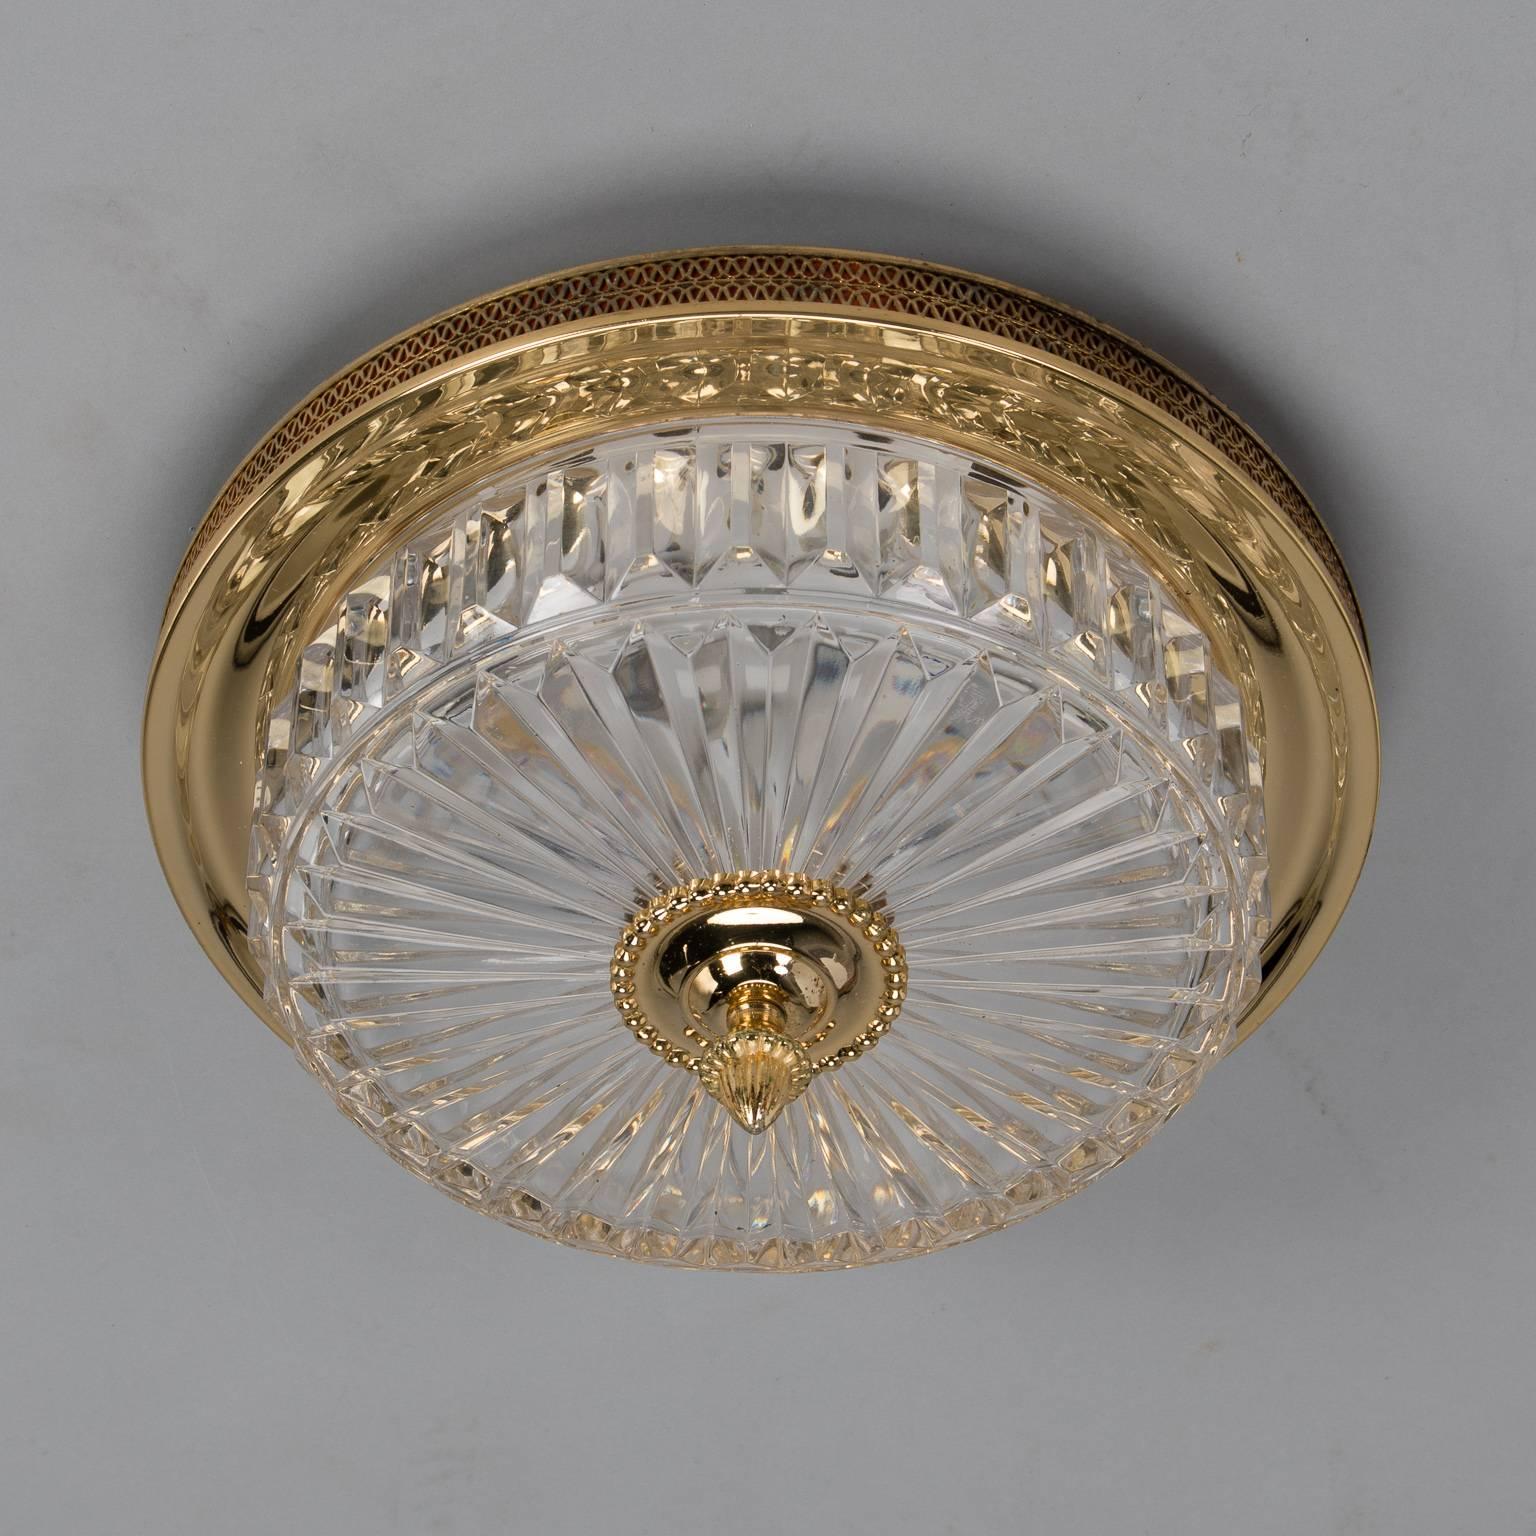 Round flush mount light fixture has a brass frame with open work border and fluted crystal bowl with brass centre, circa 1920s. Two full size internal sockets. Electrical wiring has been updated to US standards.